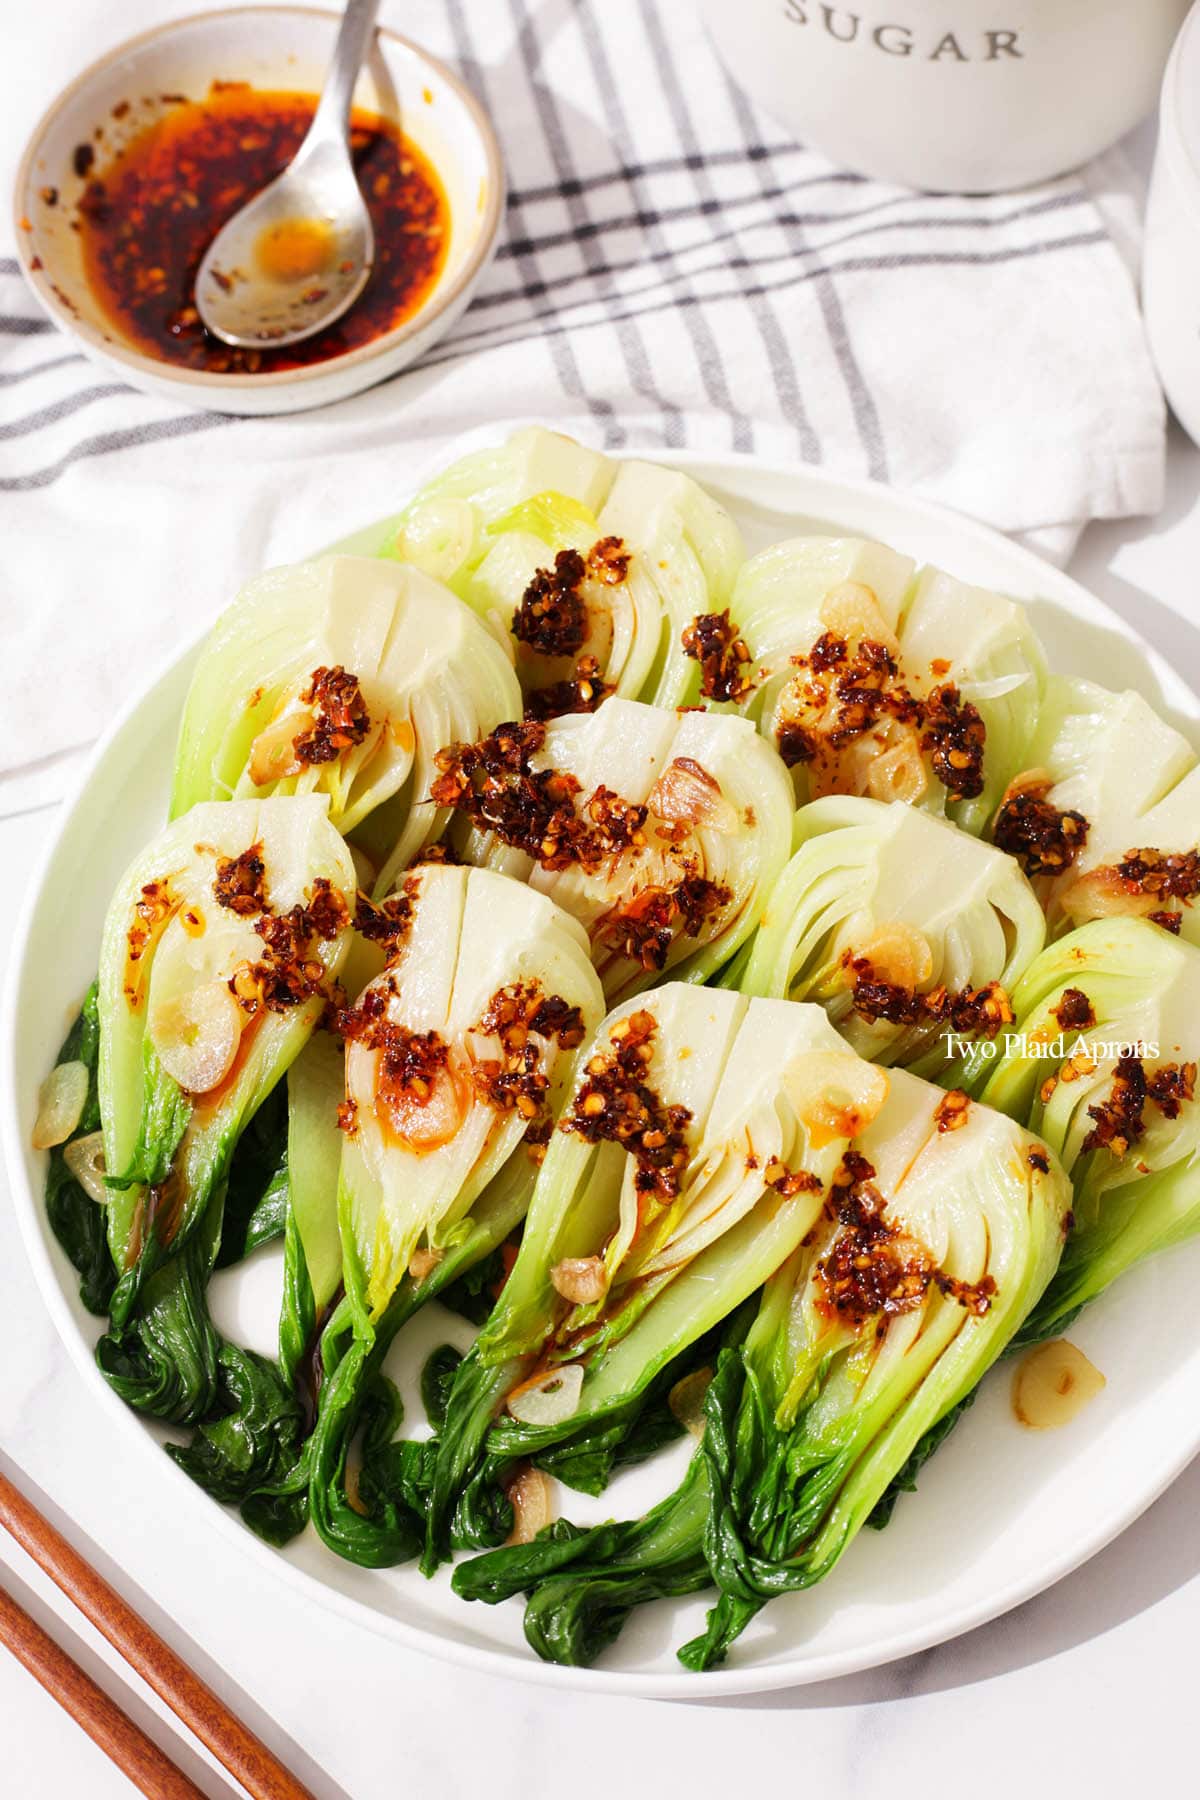 Garlic bok choy with chili oil on a plate.